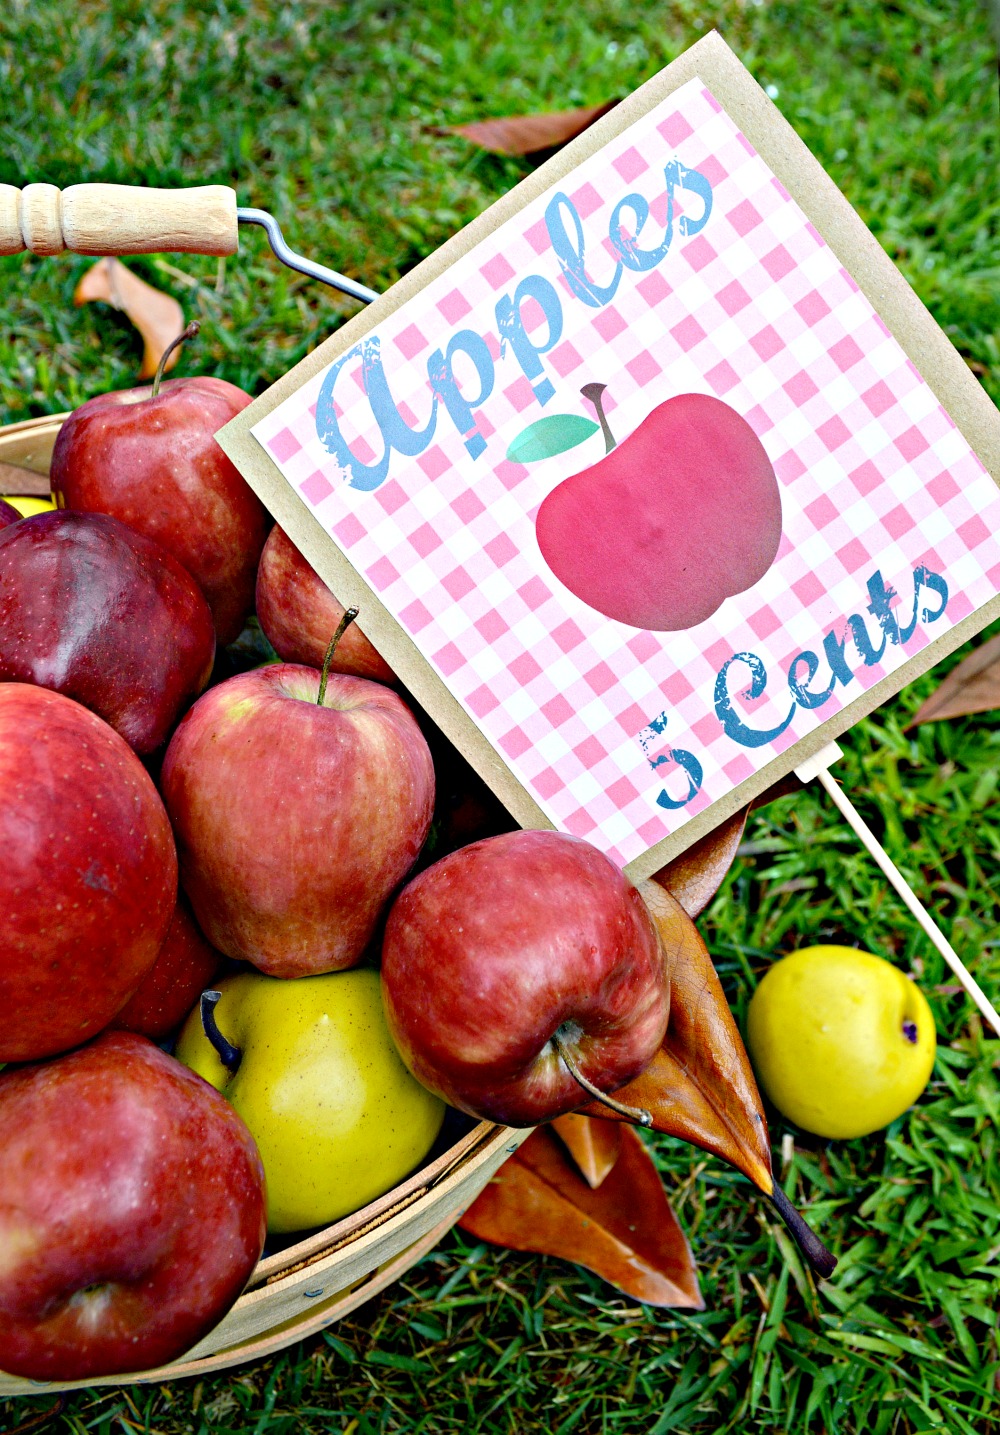 Apples 5 Cents Free printable and Vignette